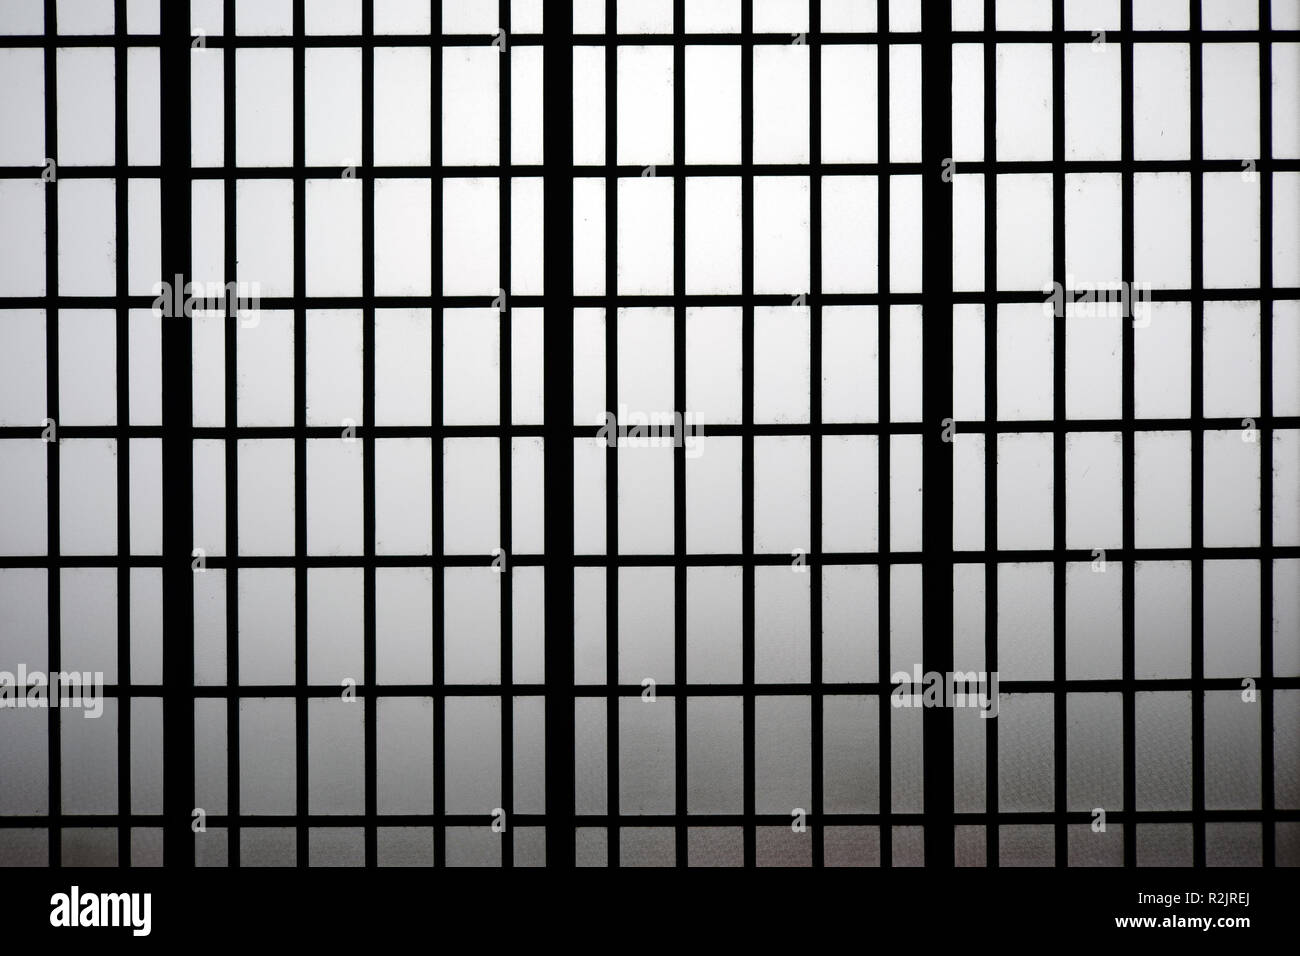 Close-up of a steel frame or steel grid with small windows, Stock Photo